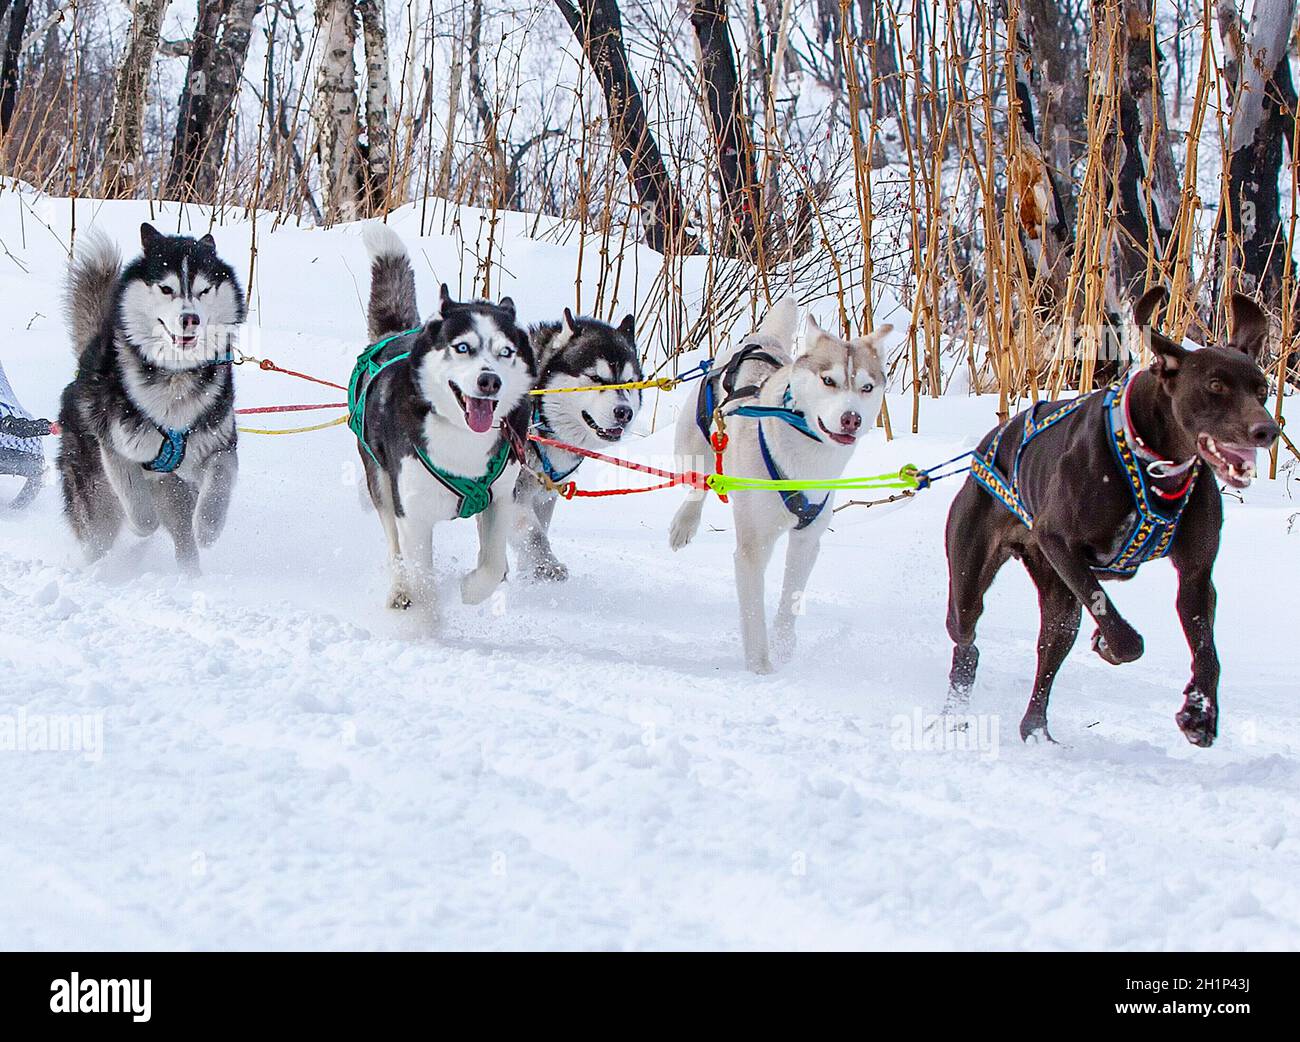 The sled dog race on snow in winter Stock Photo